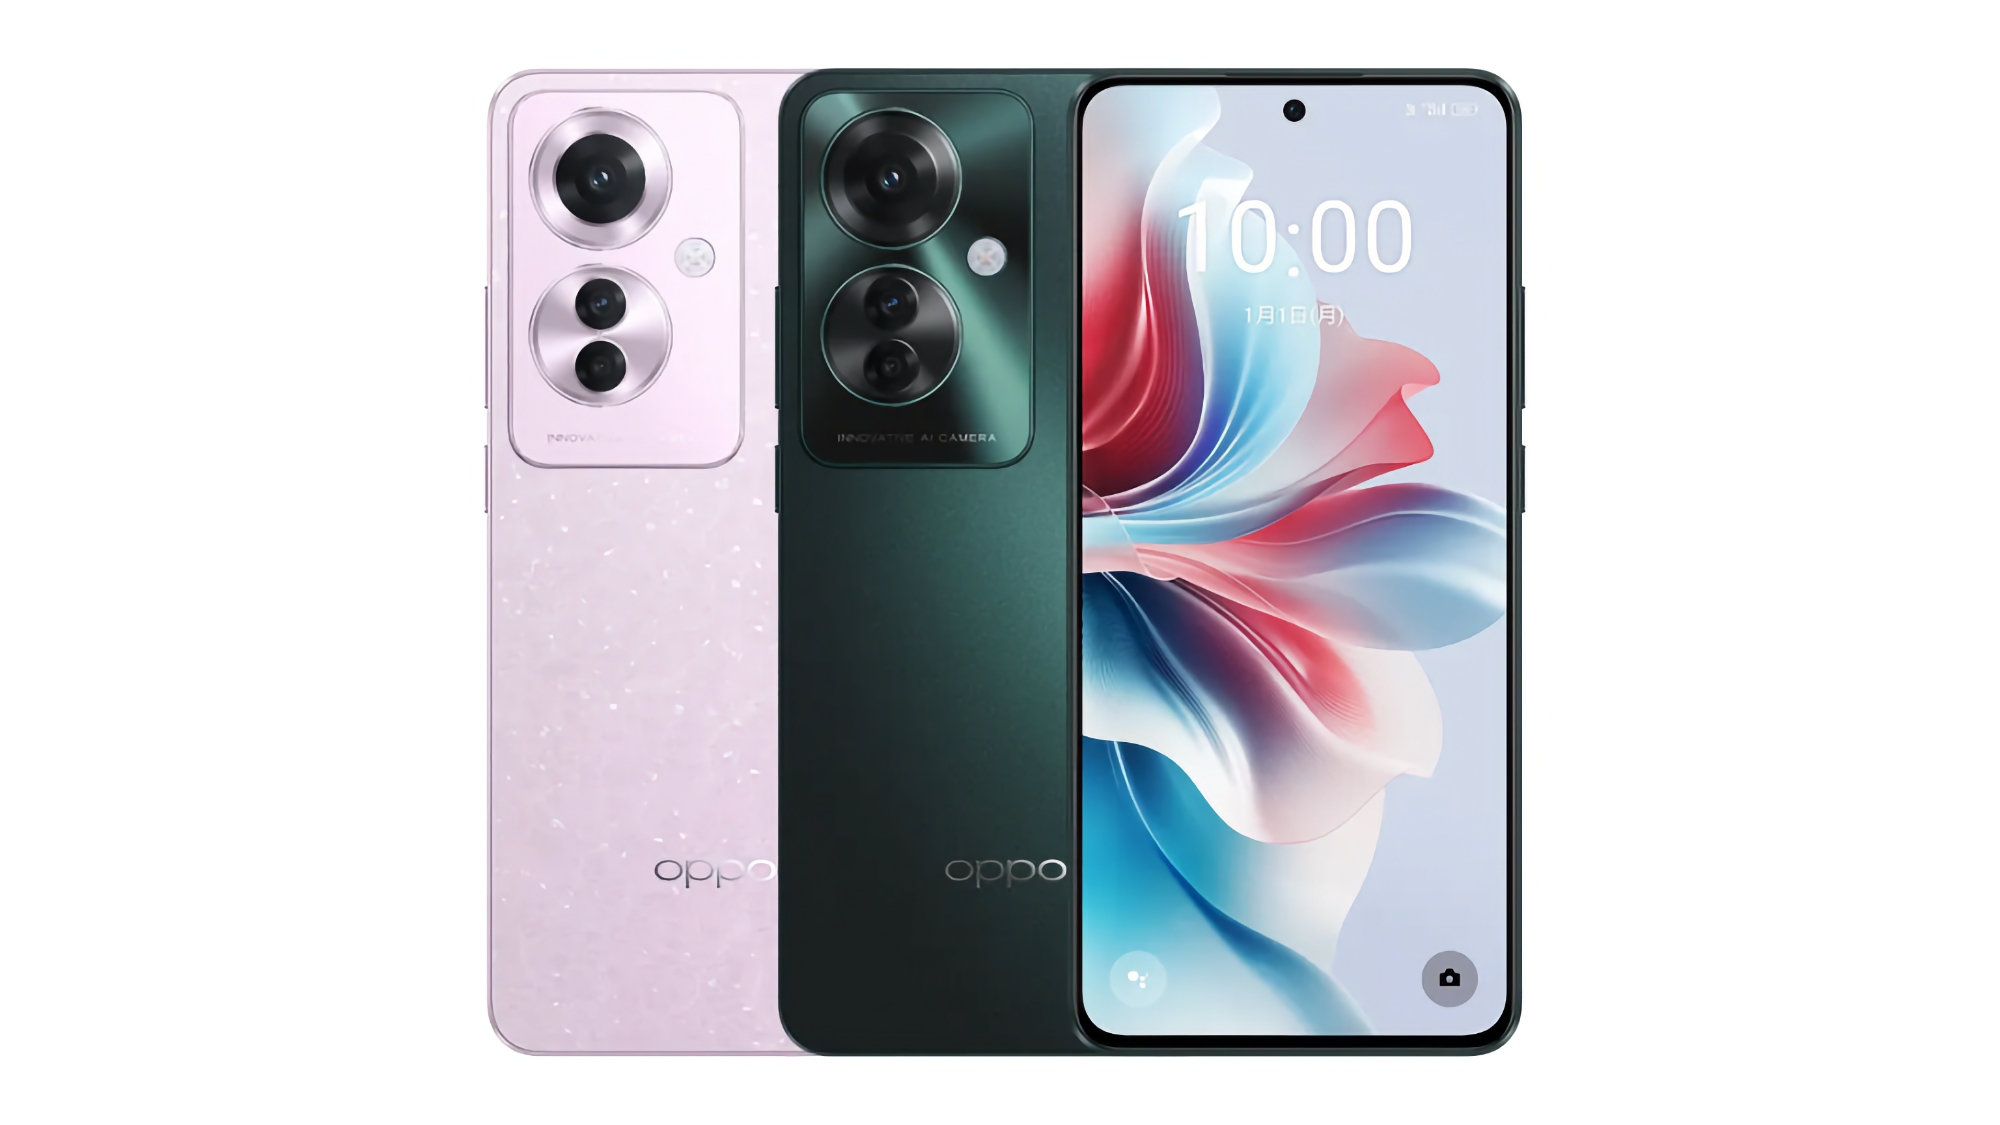 OPPO Reno 11A: 120Hz AMOLED display, MediaTek Dimensity 7050 chip, 64 MP camera, IP65 protection and 67W charging for $307